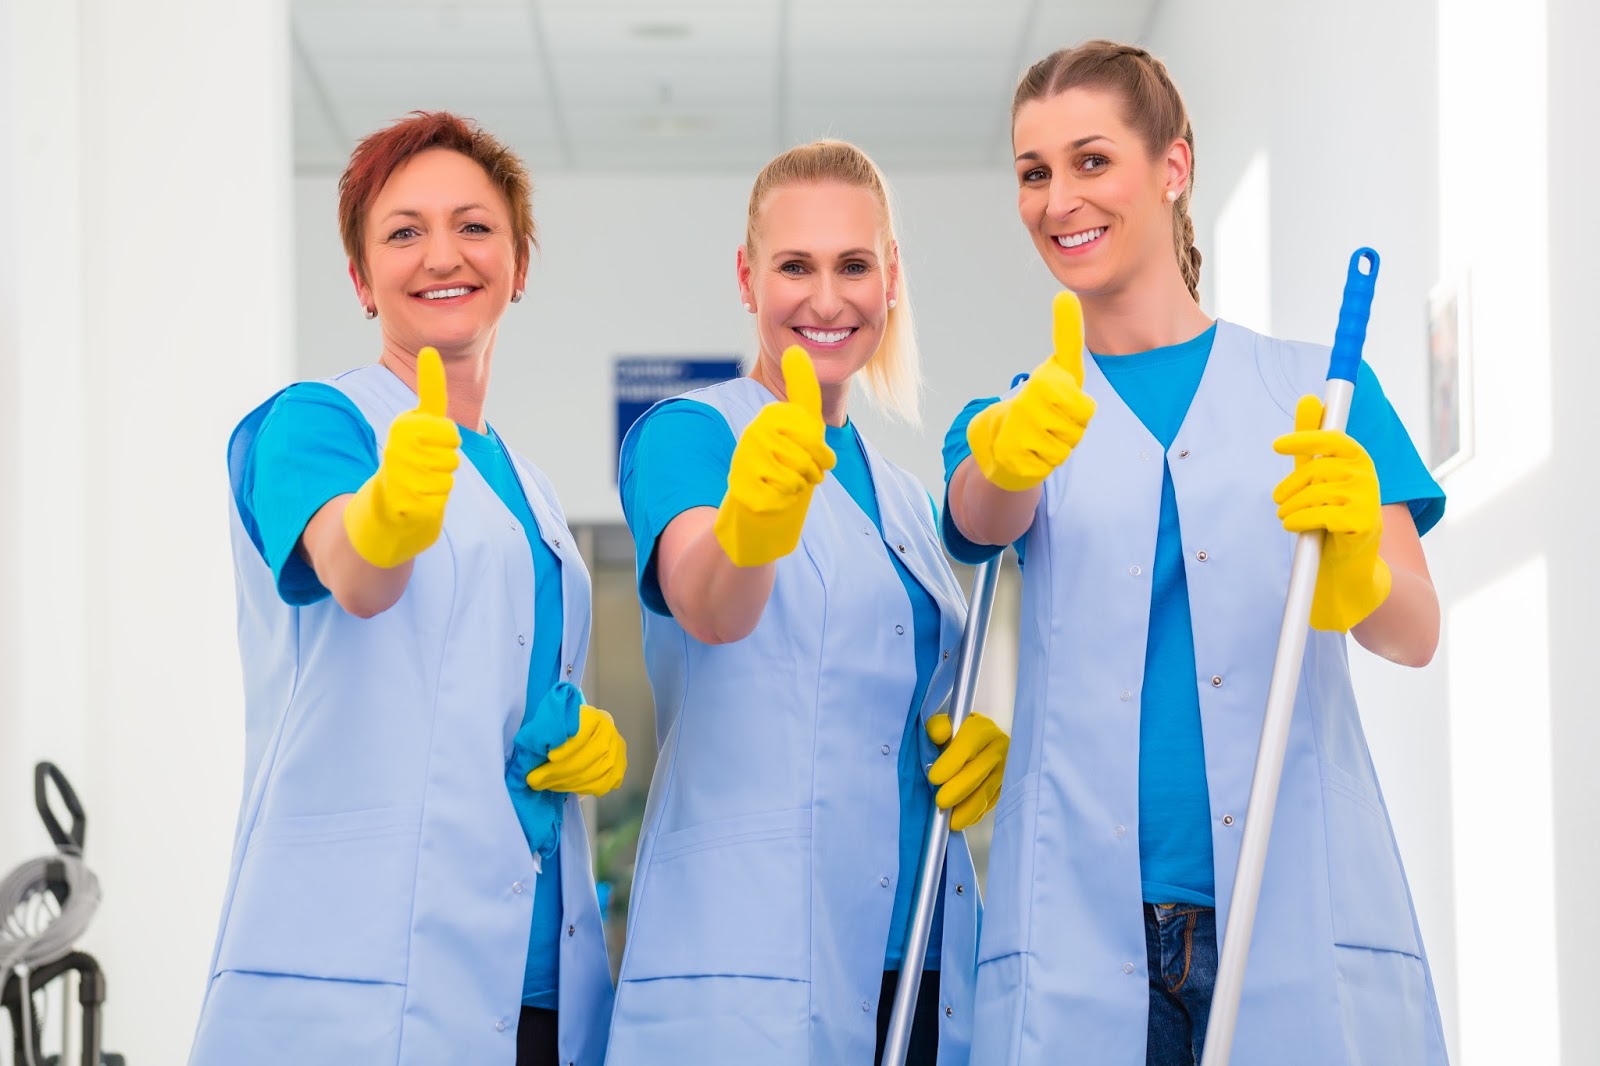 London Based Cleaning Company 'Friendly Cleaners' Announce its Expansion